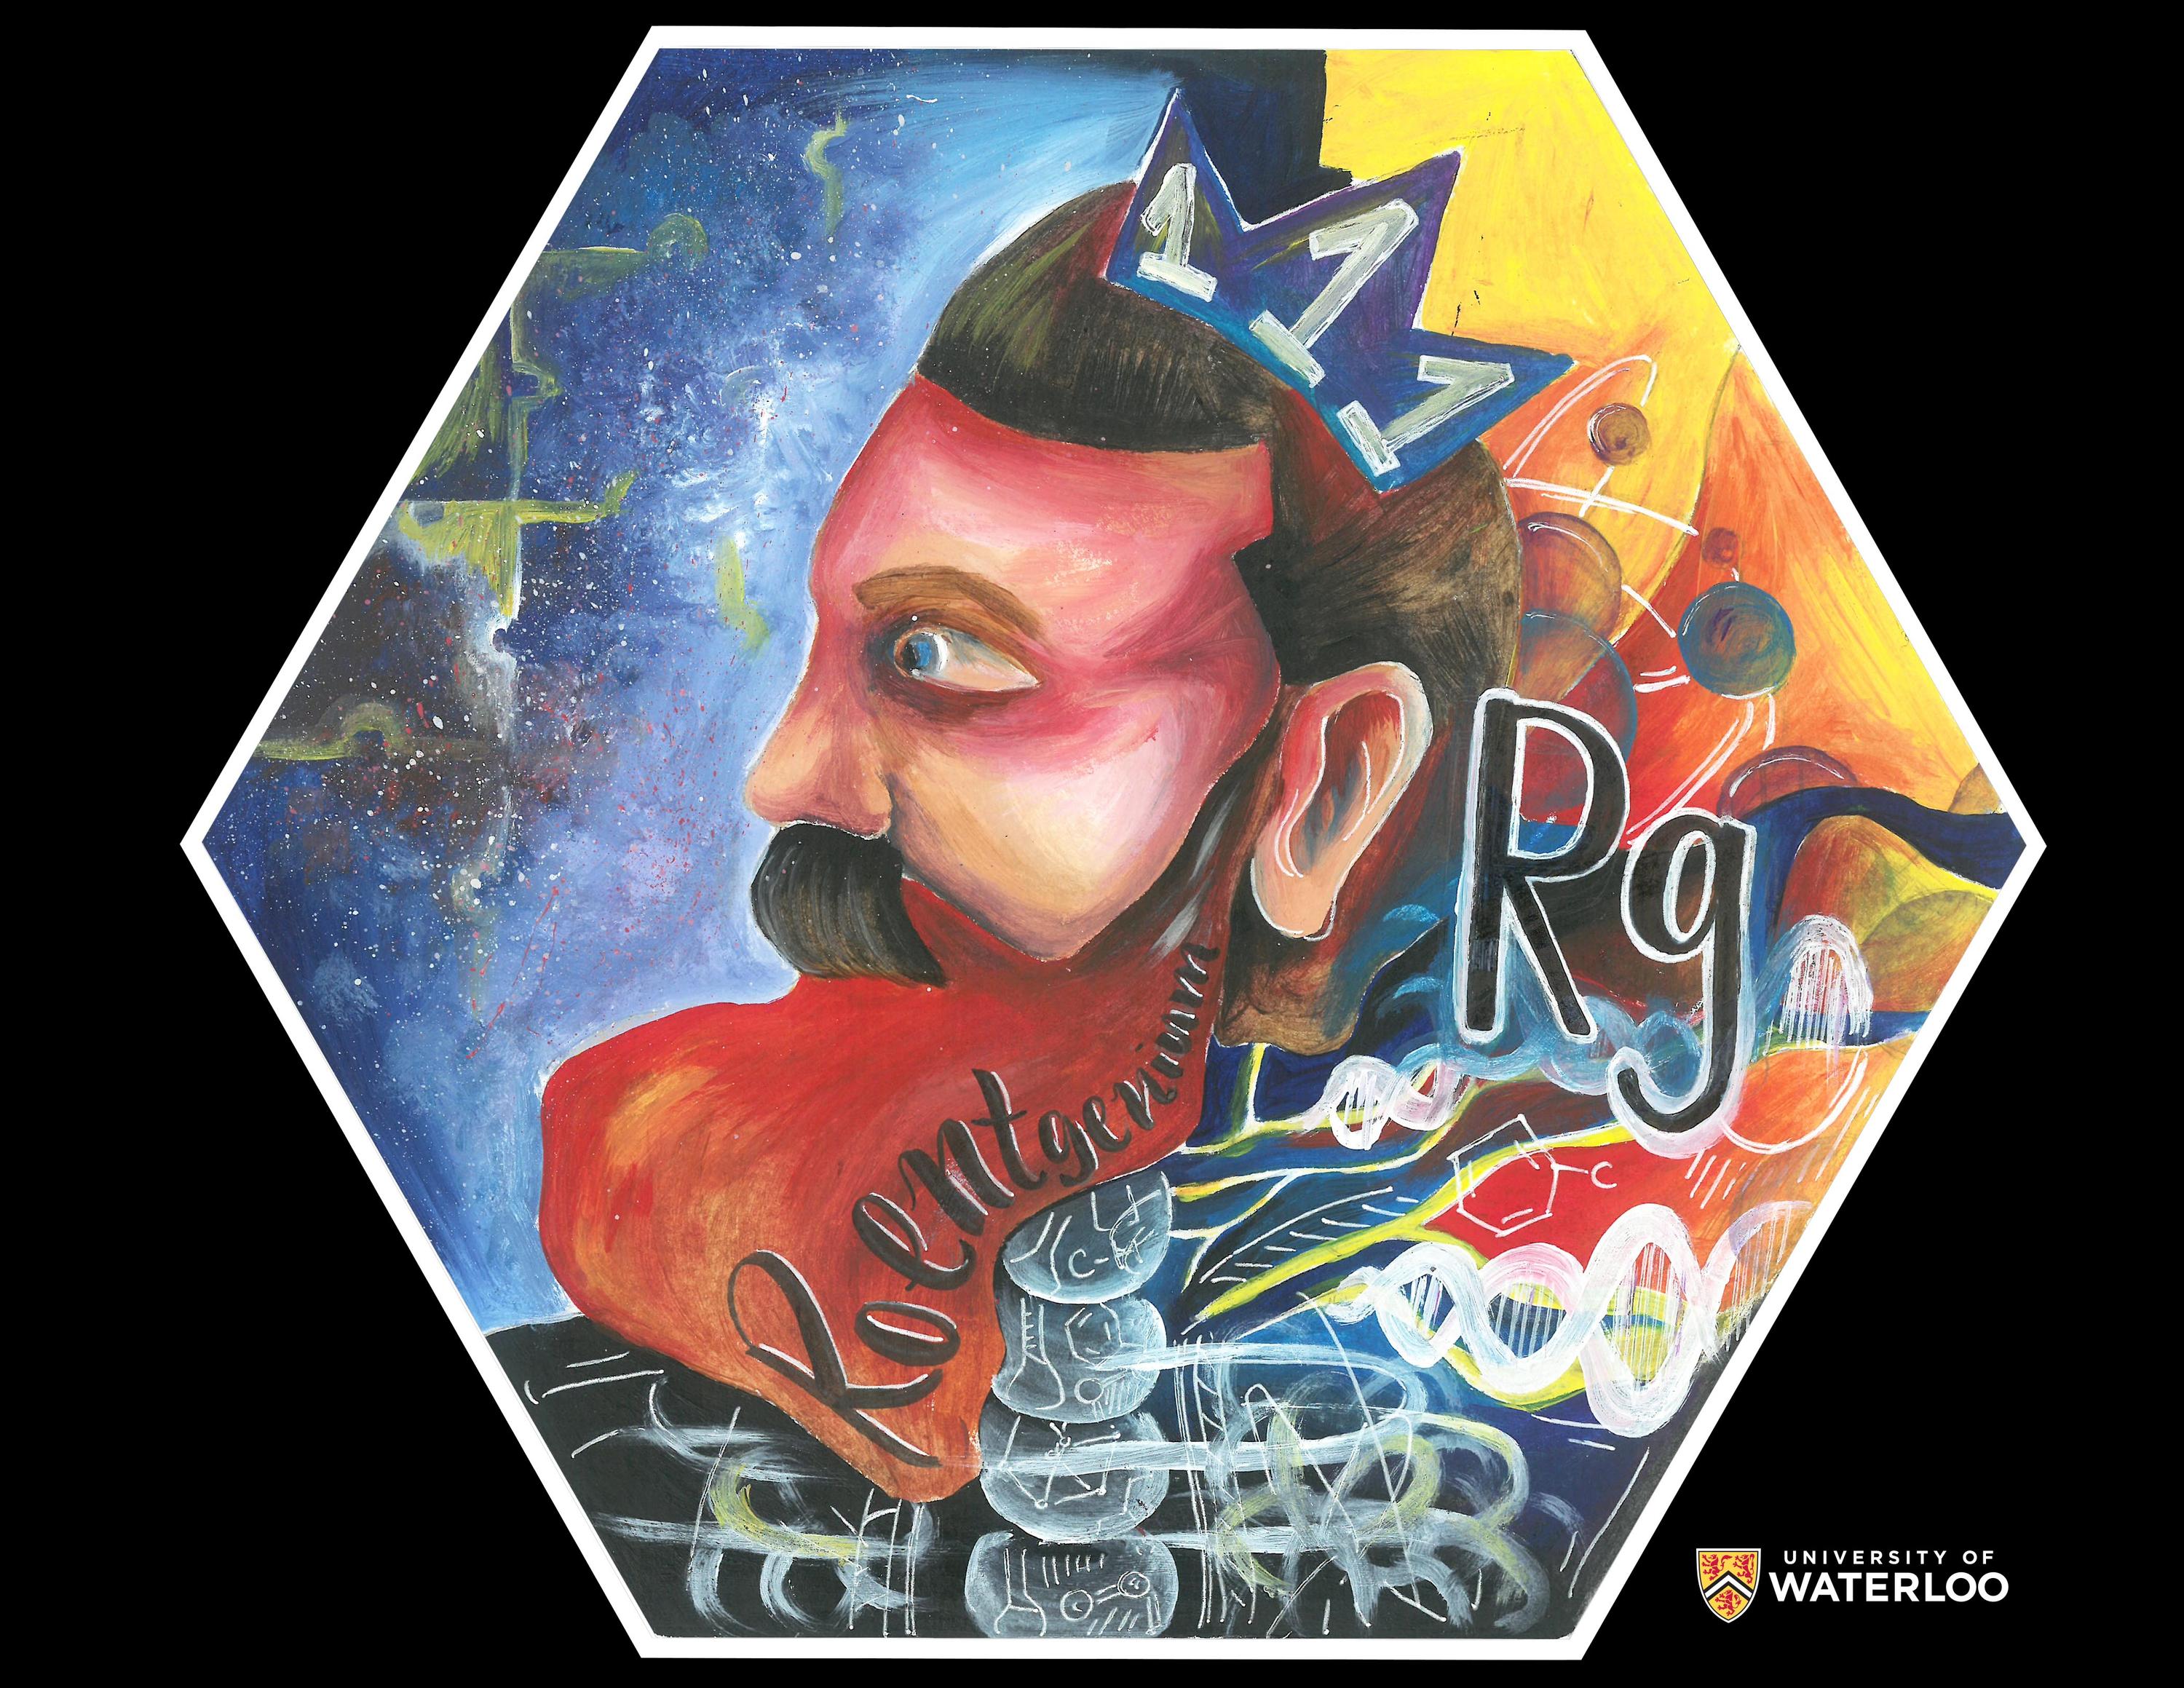 Acrylic. Side portrait of Wilhelm Rontgen centre. On his head appears a crown with “111”; on his beard “Roentgenium”. He’s facing outer space to the left showing faint outlines of puzzle pieces. Behind him on the right is the chemical symbol “Rg”. His shoulders and chest appear as x-rays. The right side features reds and oranges and a variety of chemical structures and DNA helixes.